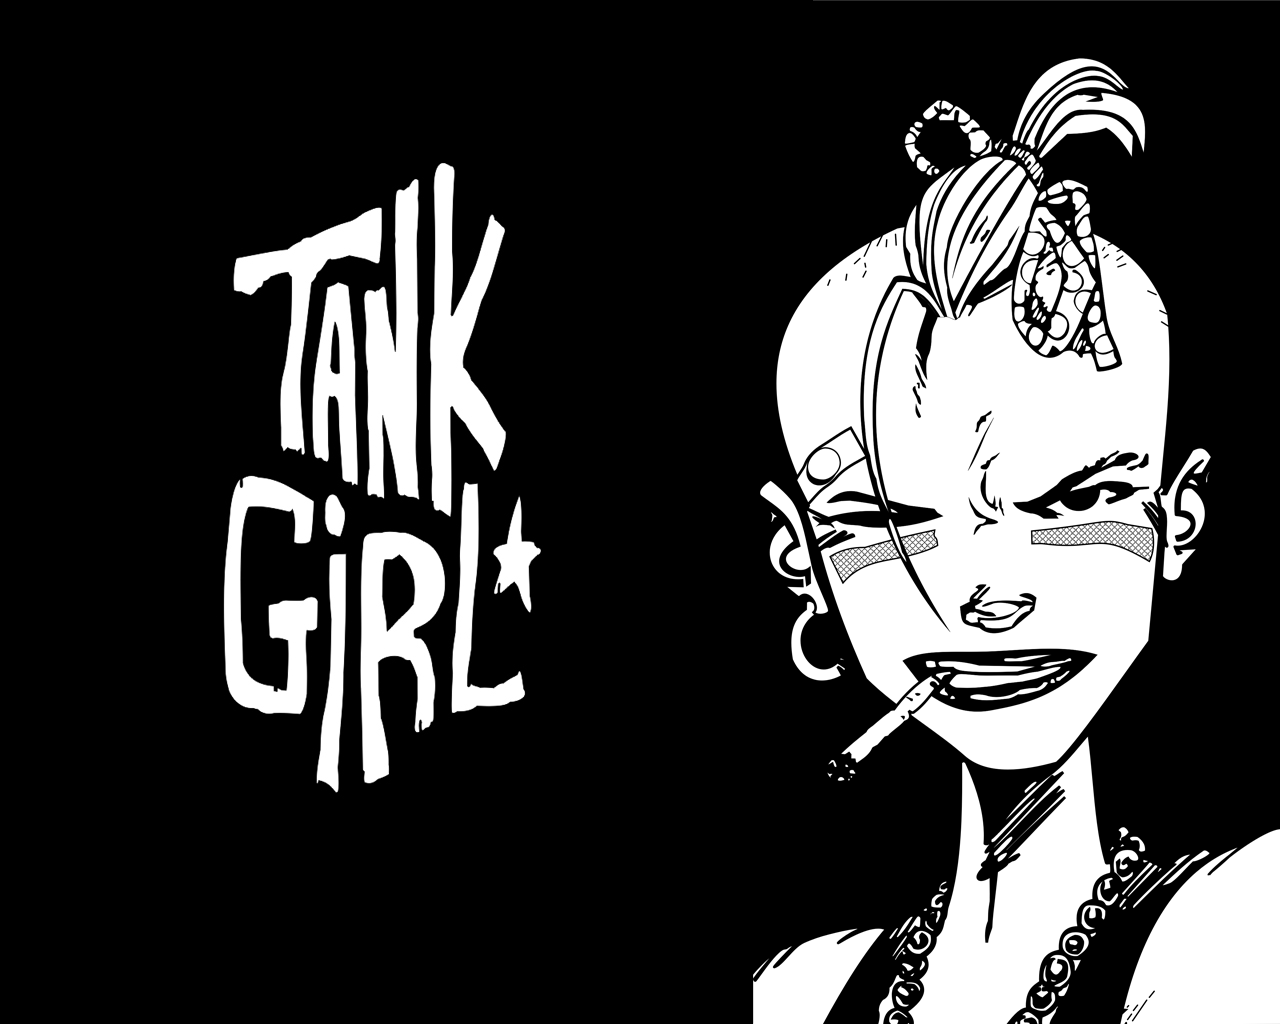 Tank Girl Backgrounds, Compatible - PC, Mobile, Gadgets| 1280x1024 px